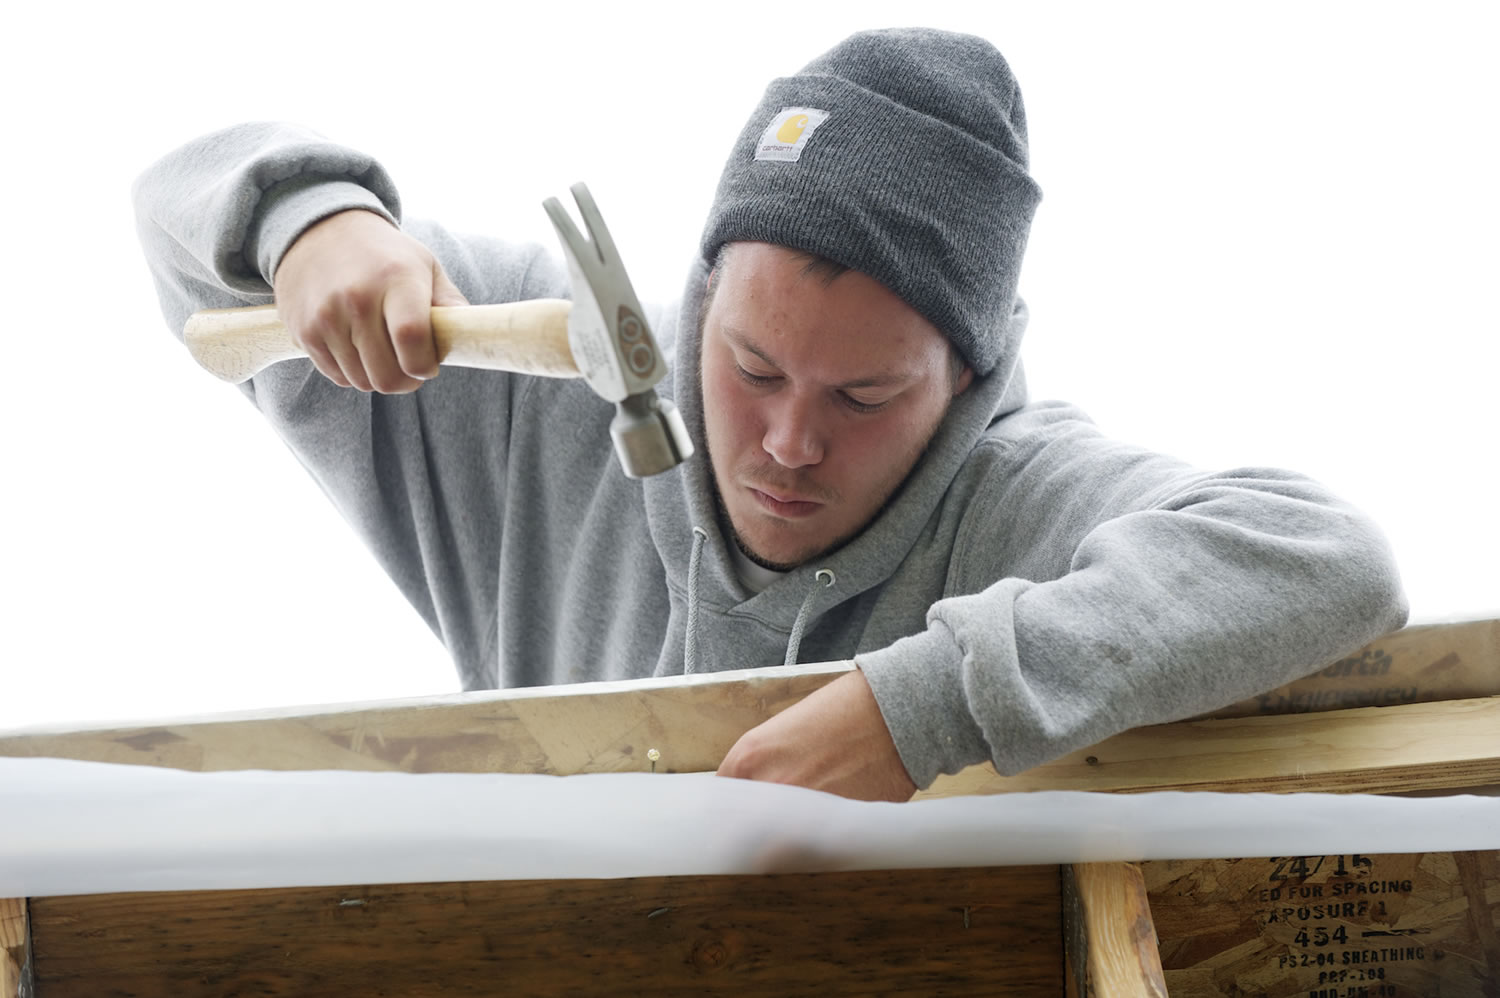 Thaddaeus Fronk, a student at the Clark County Skills Center, works on a Habitat for Humanity house built in partnership with Evergreen Public Schools.